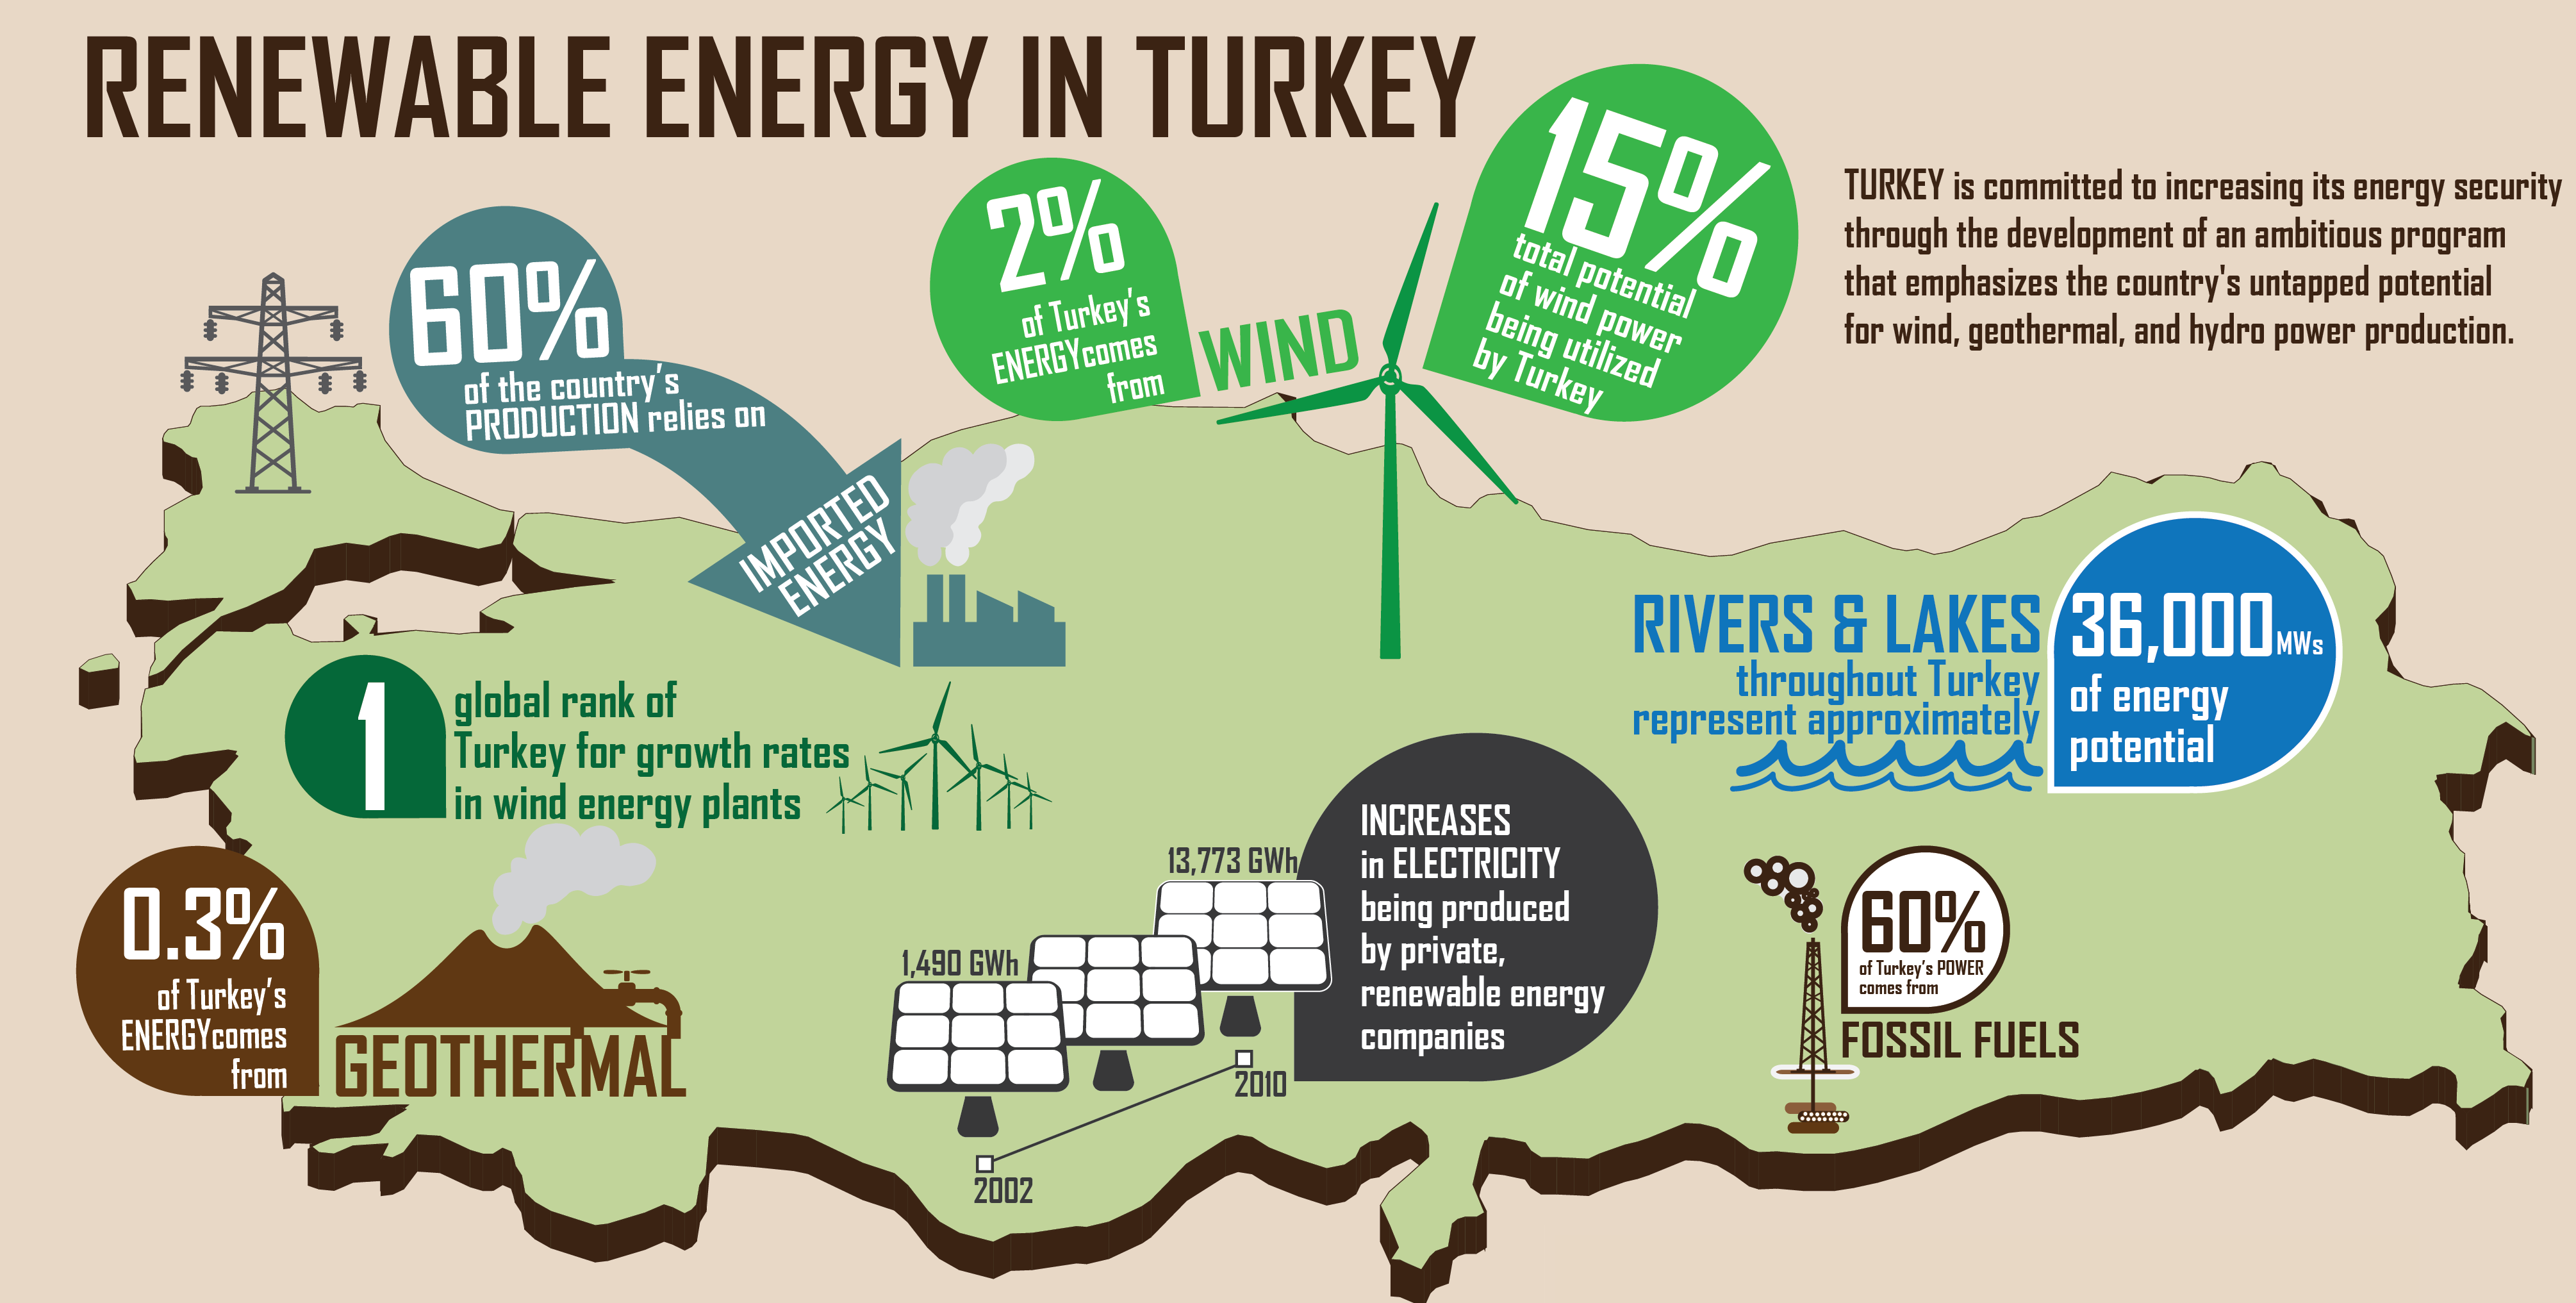 The government plans to have more Turkish workers trained in renewables